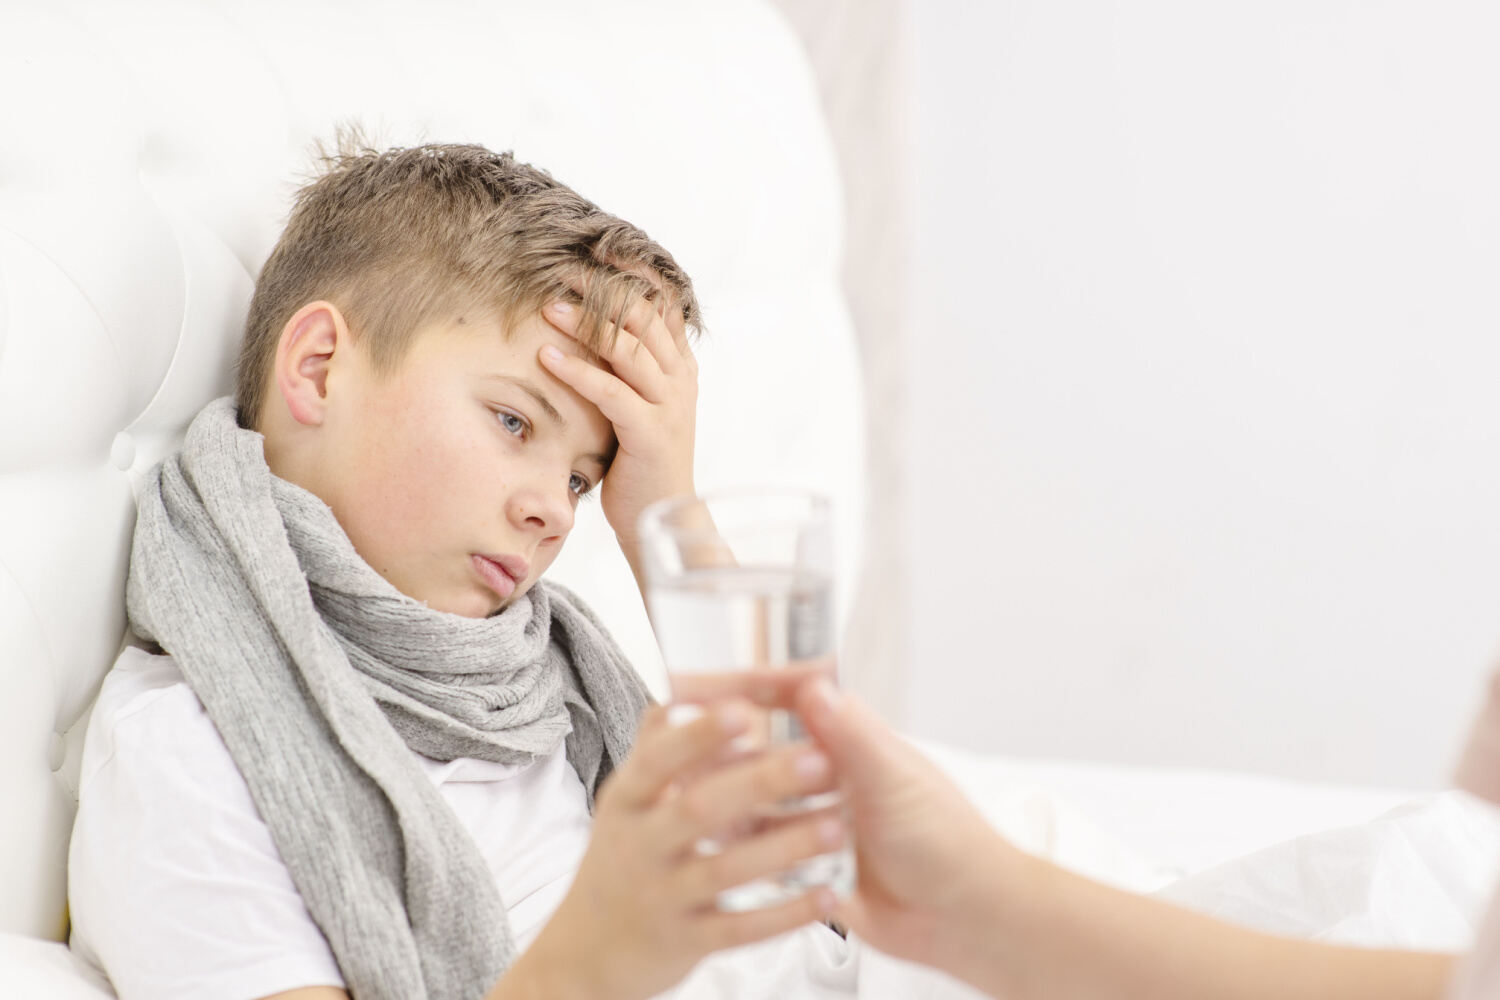 Enema can cause dehydration in kids